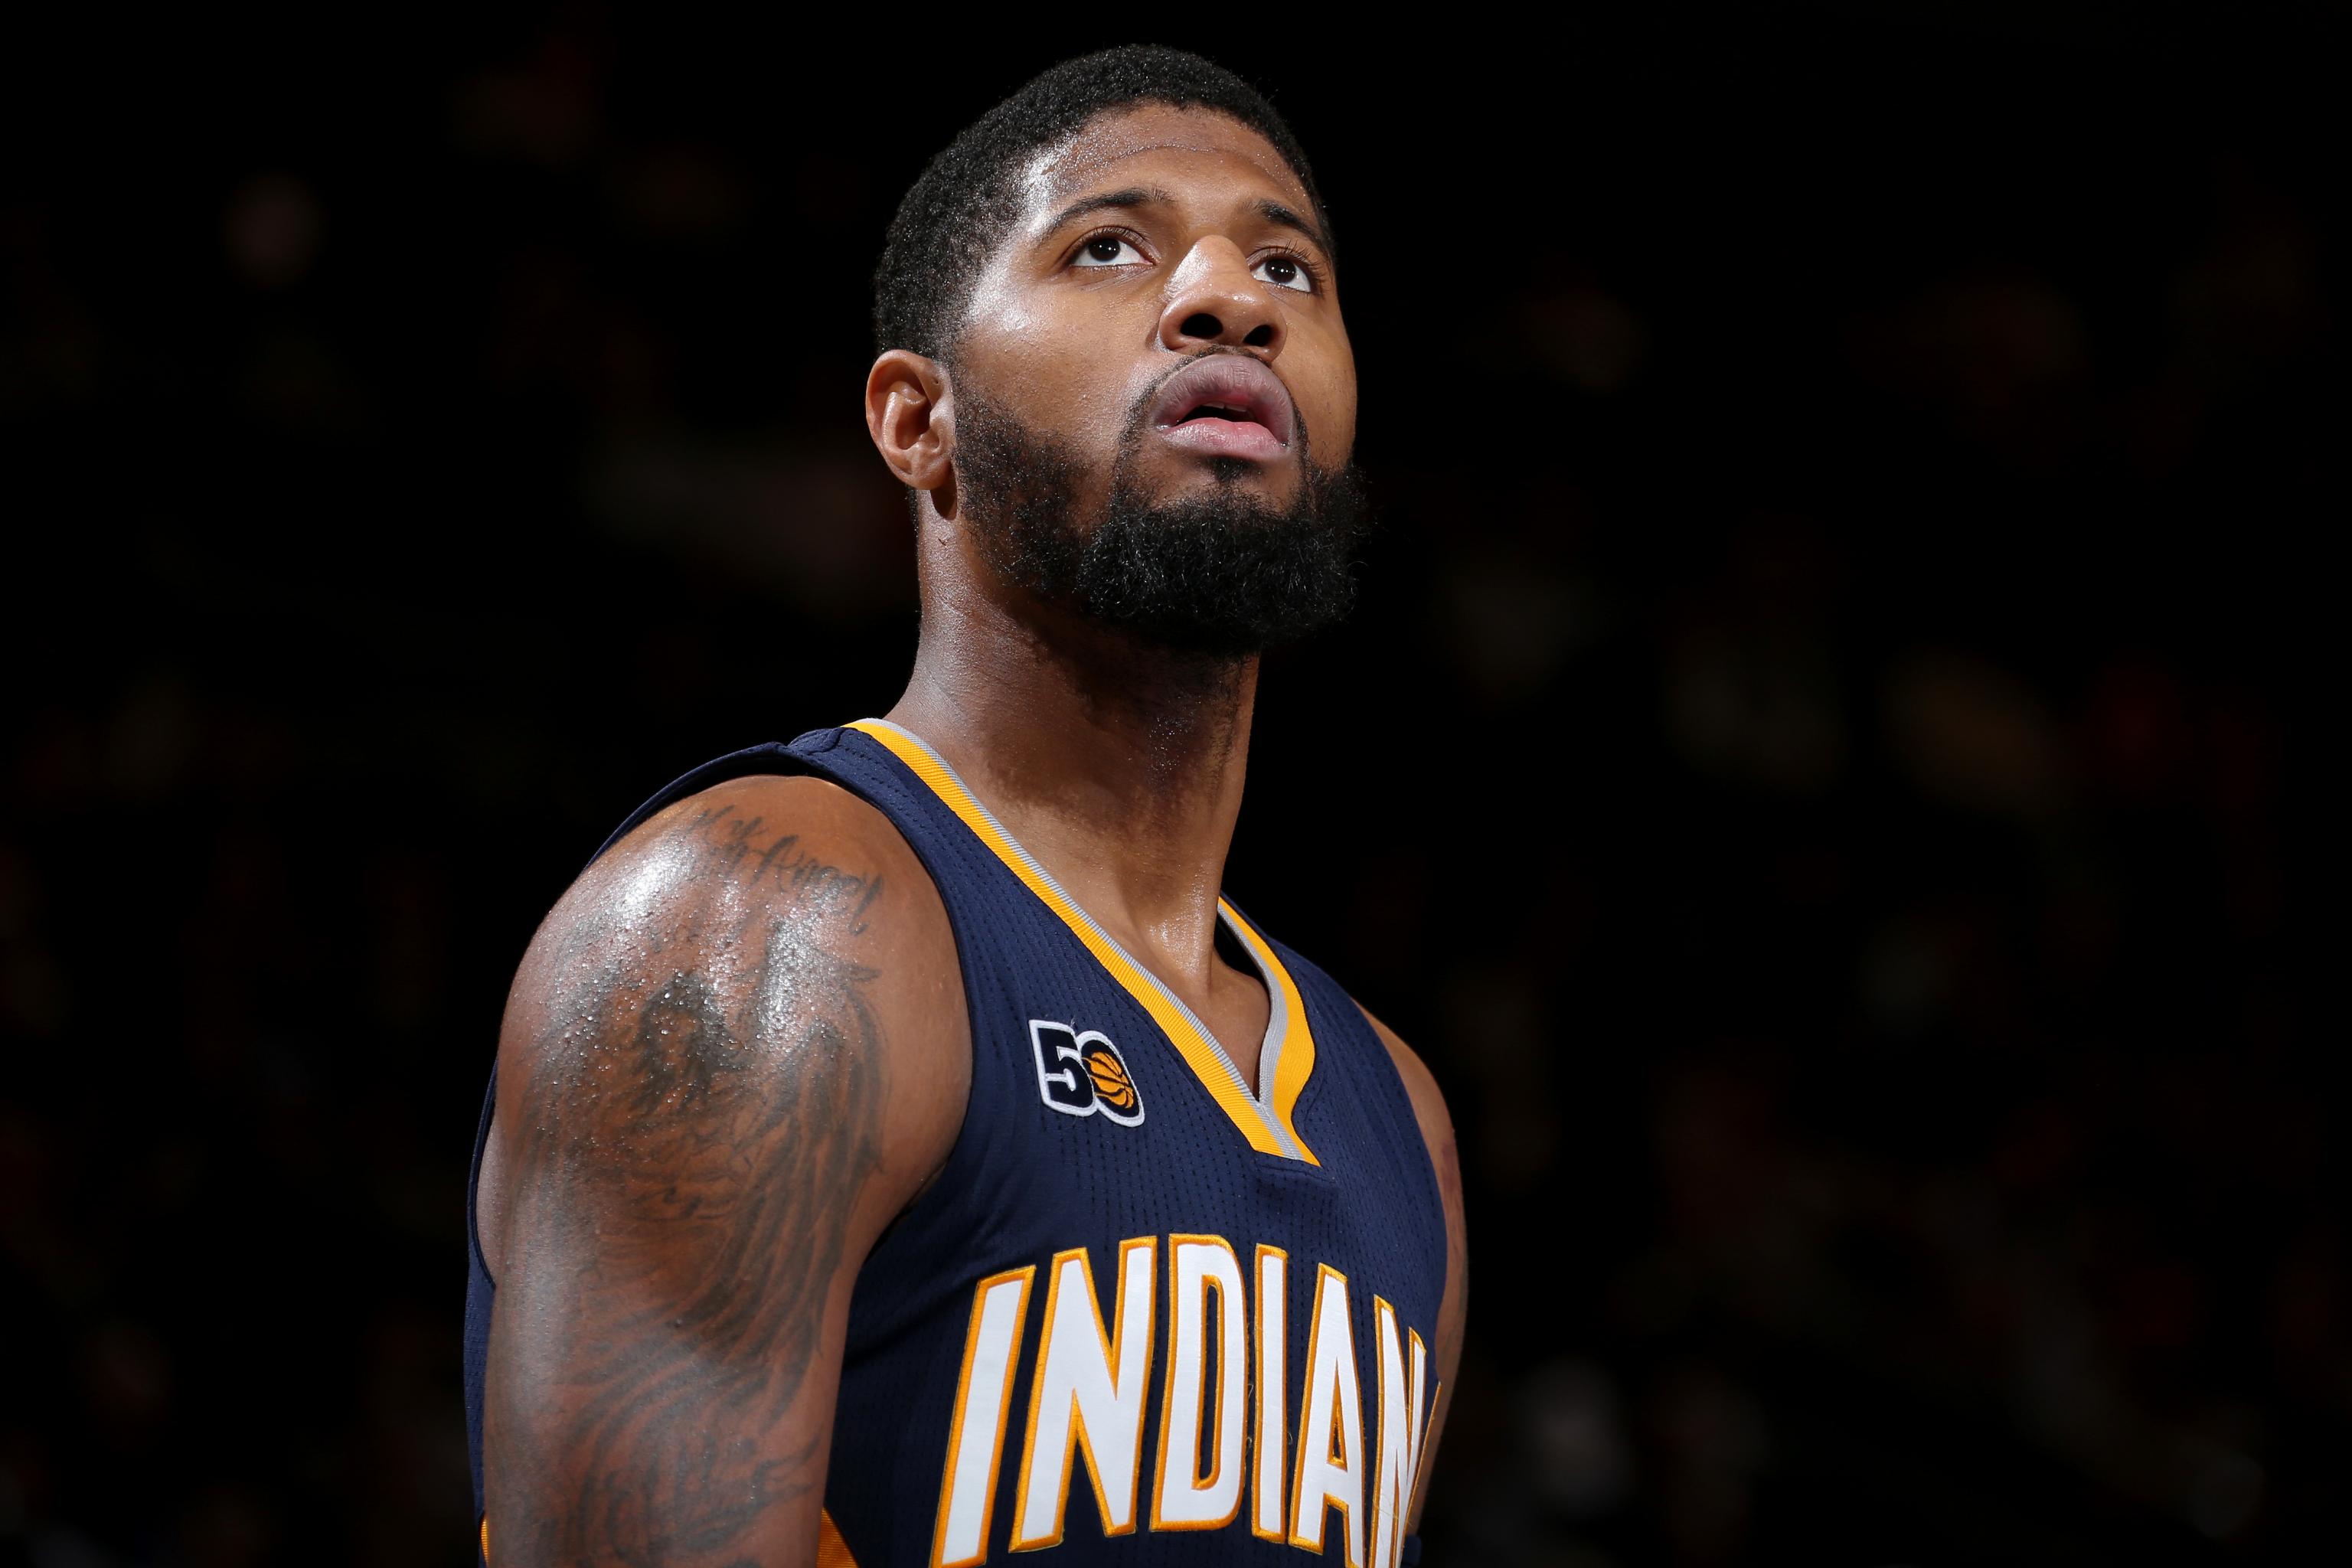 Paul George will live up to his giant contract with the Pacers